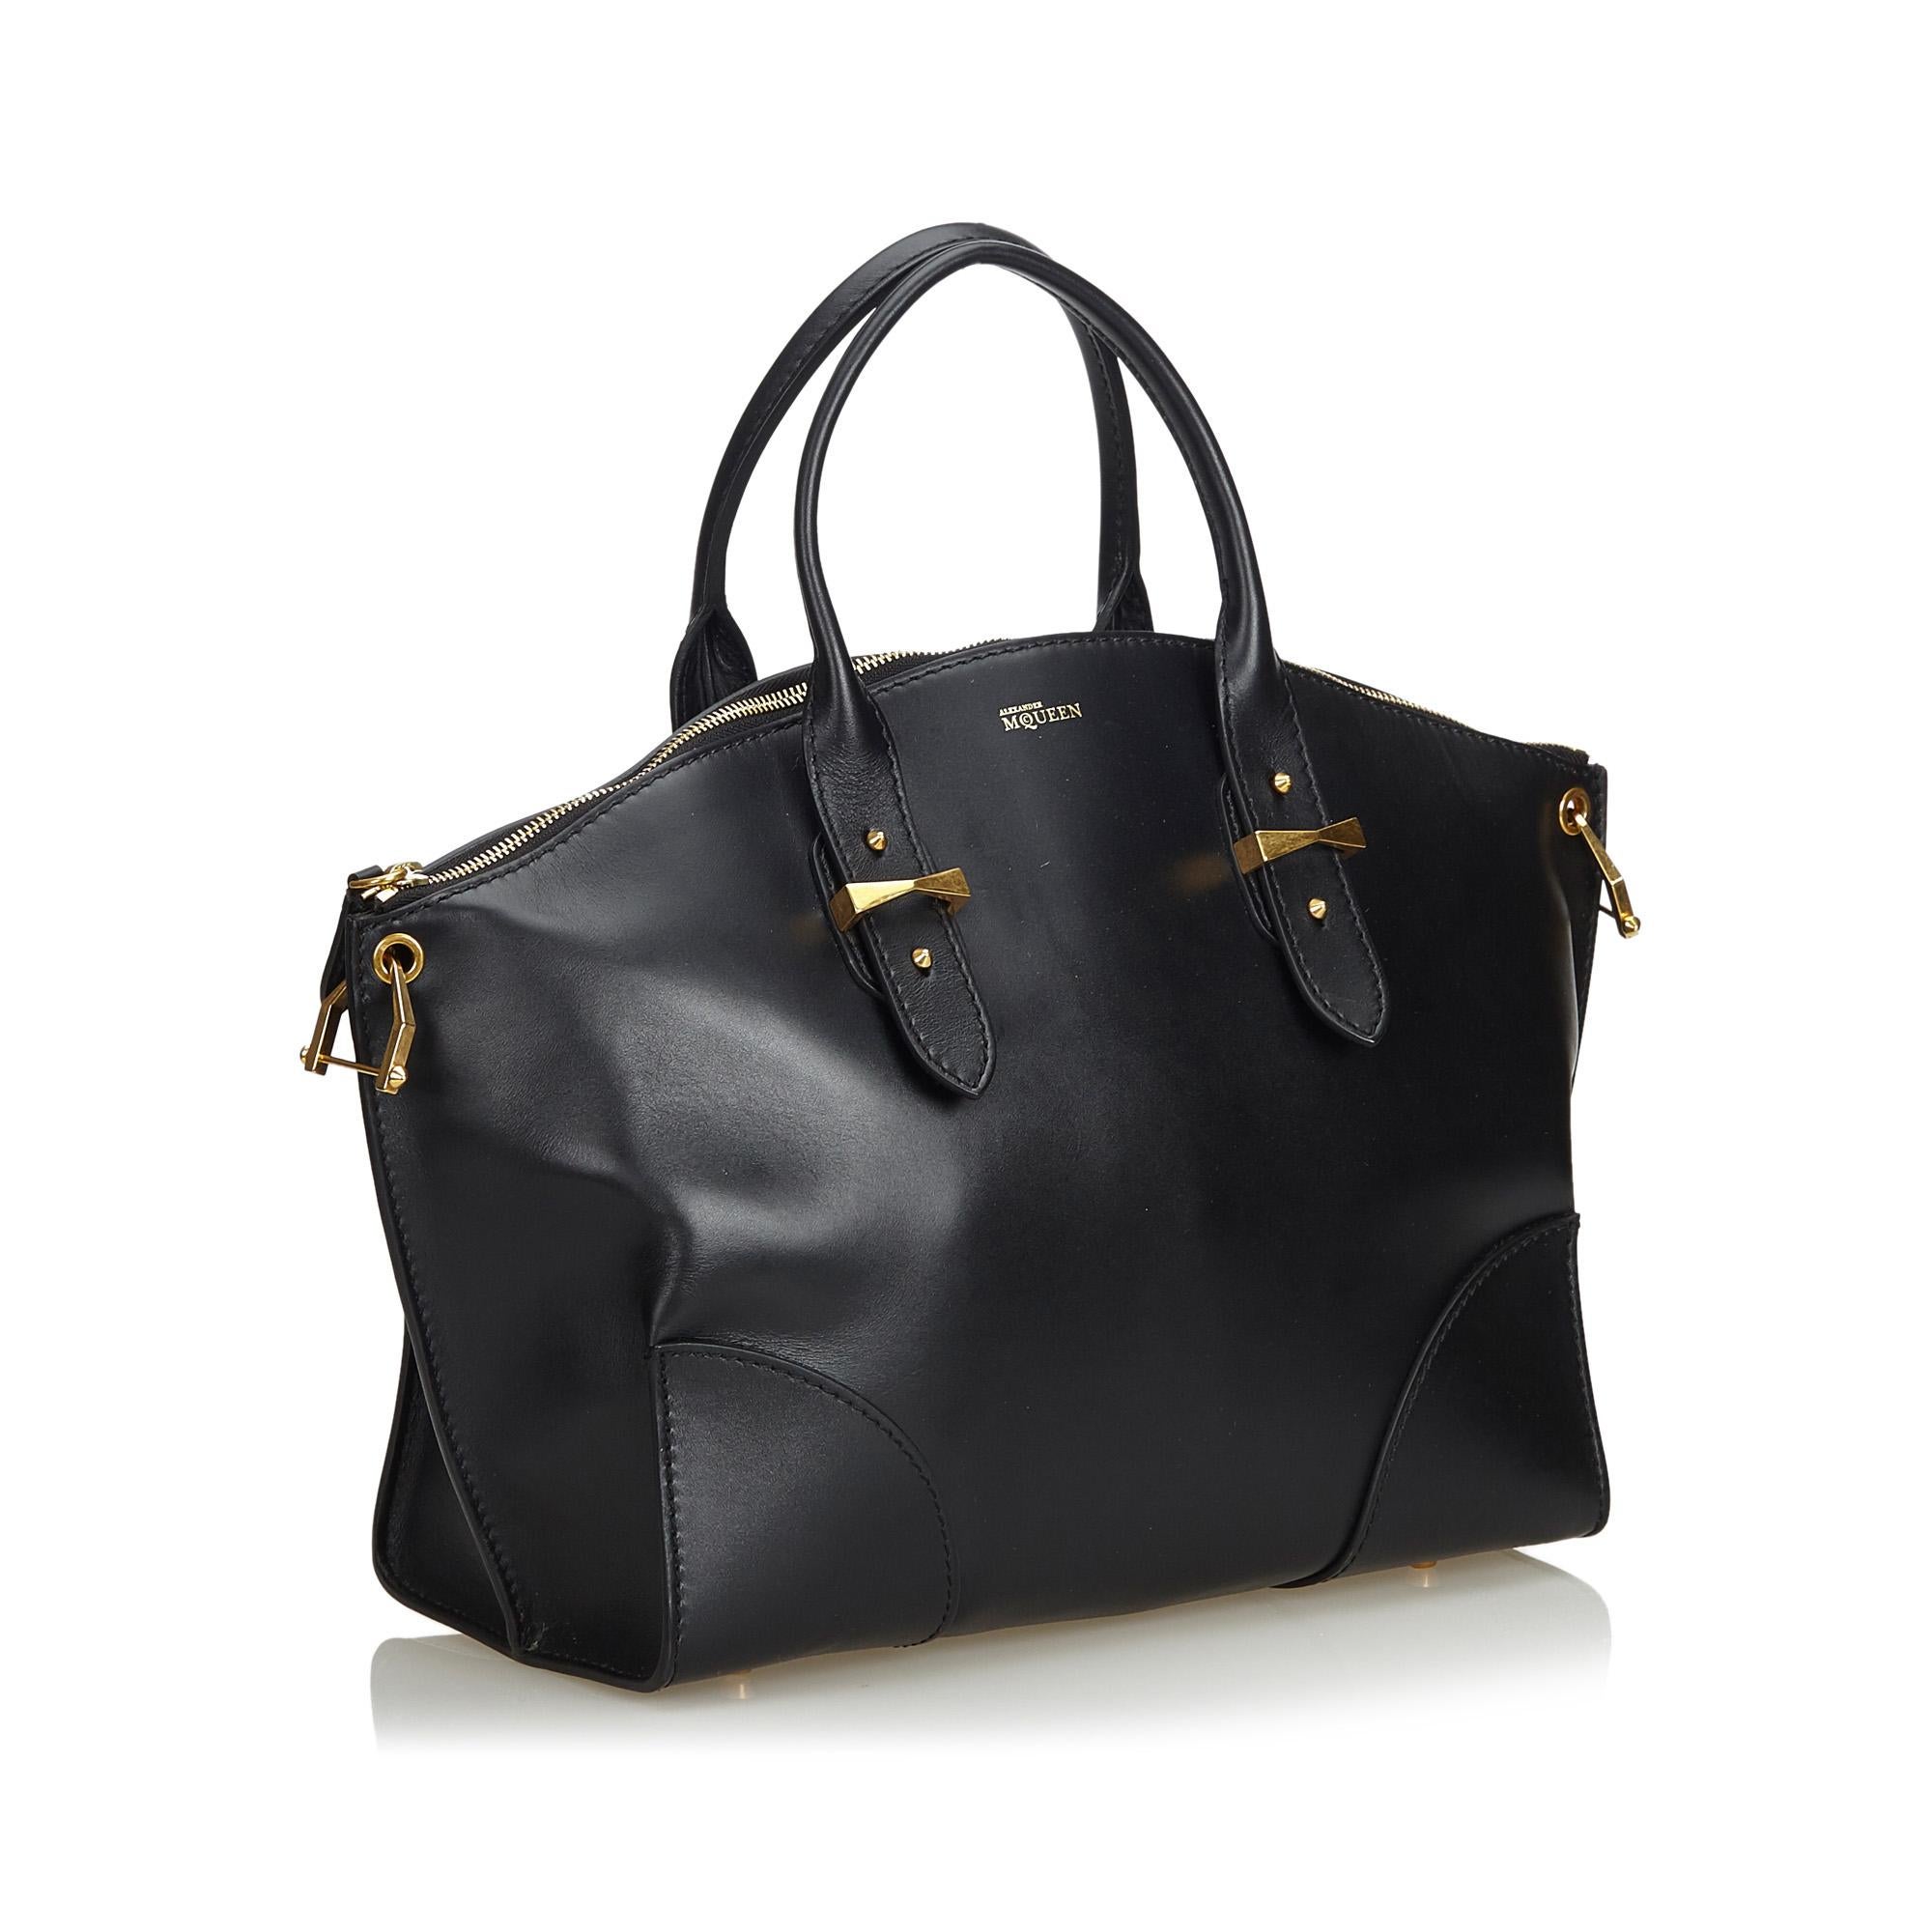 The Legend handbag features a leather body, rolled leather handles, a top zip closure, and interior zip and slip pockets. It carries as B+ condition rating.

Inclusions: 
This item does not come with inclusions.

Dimensions:
Length: 23.00 cm
Width: